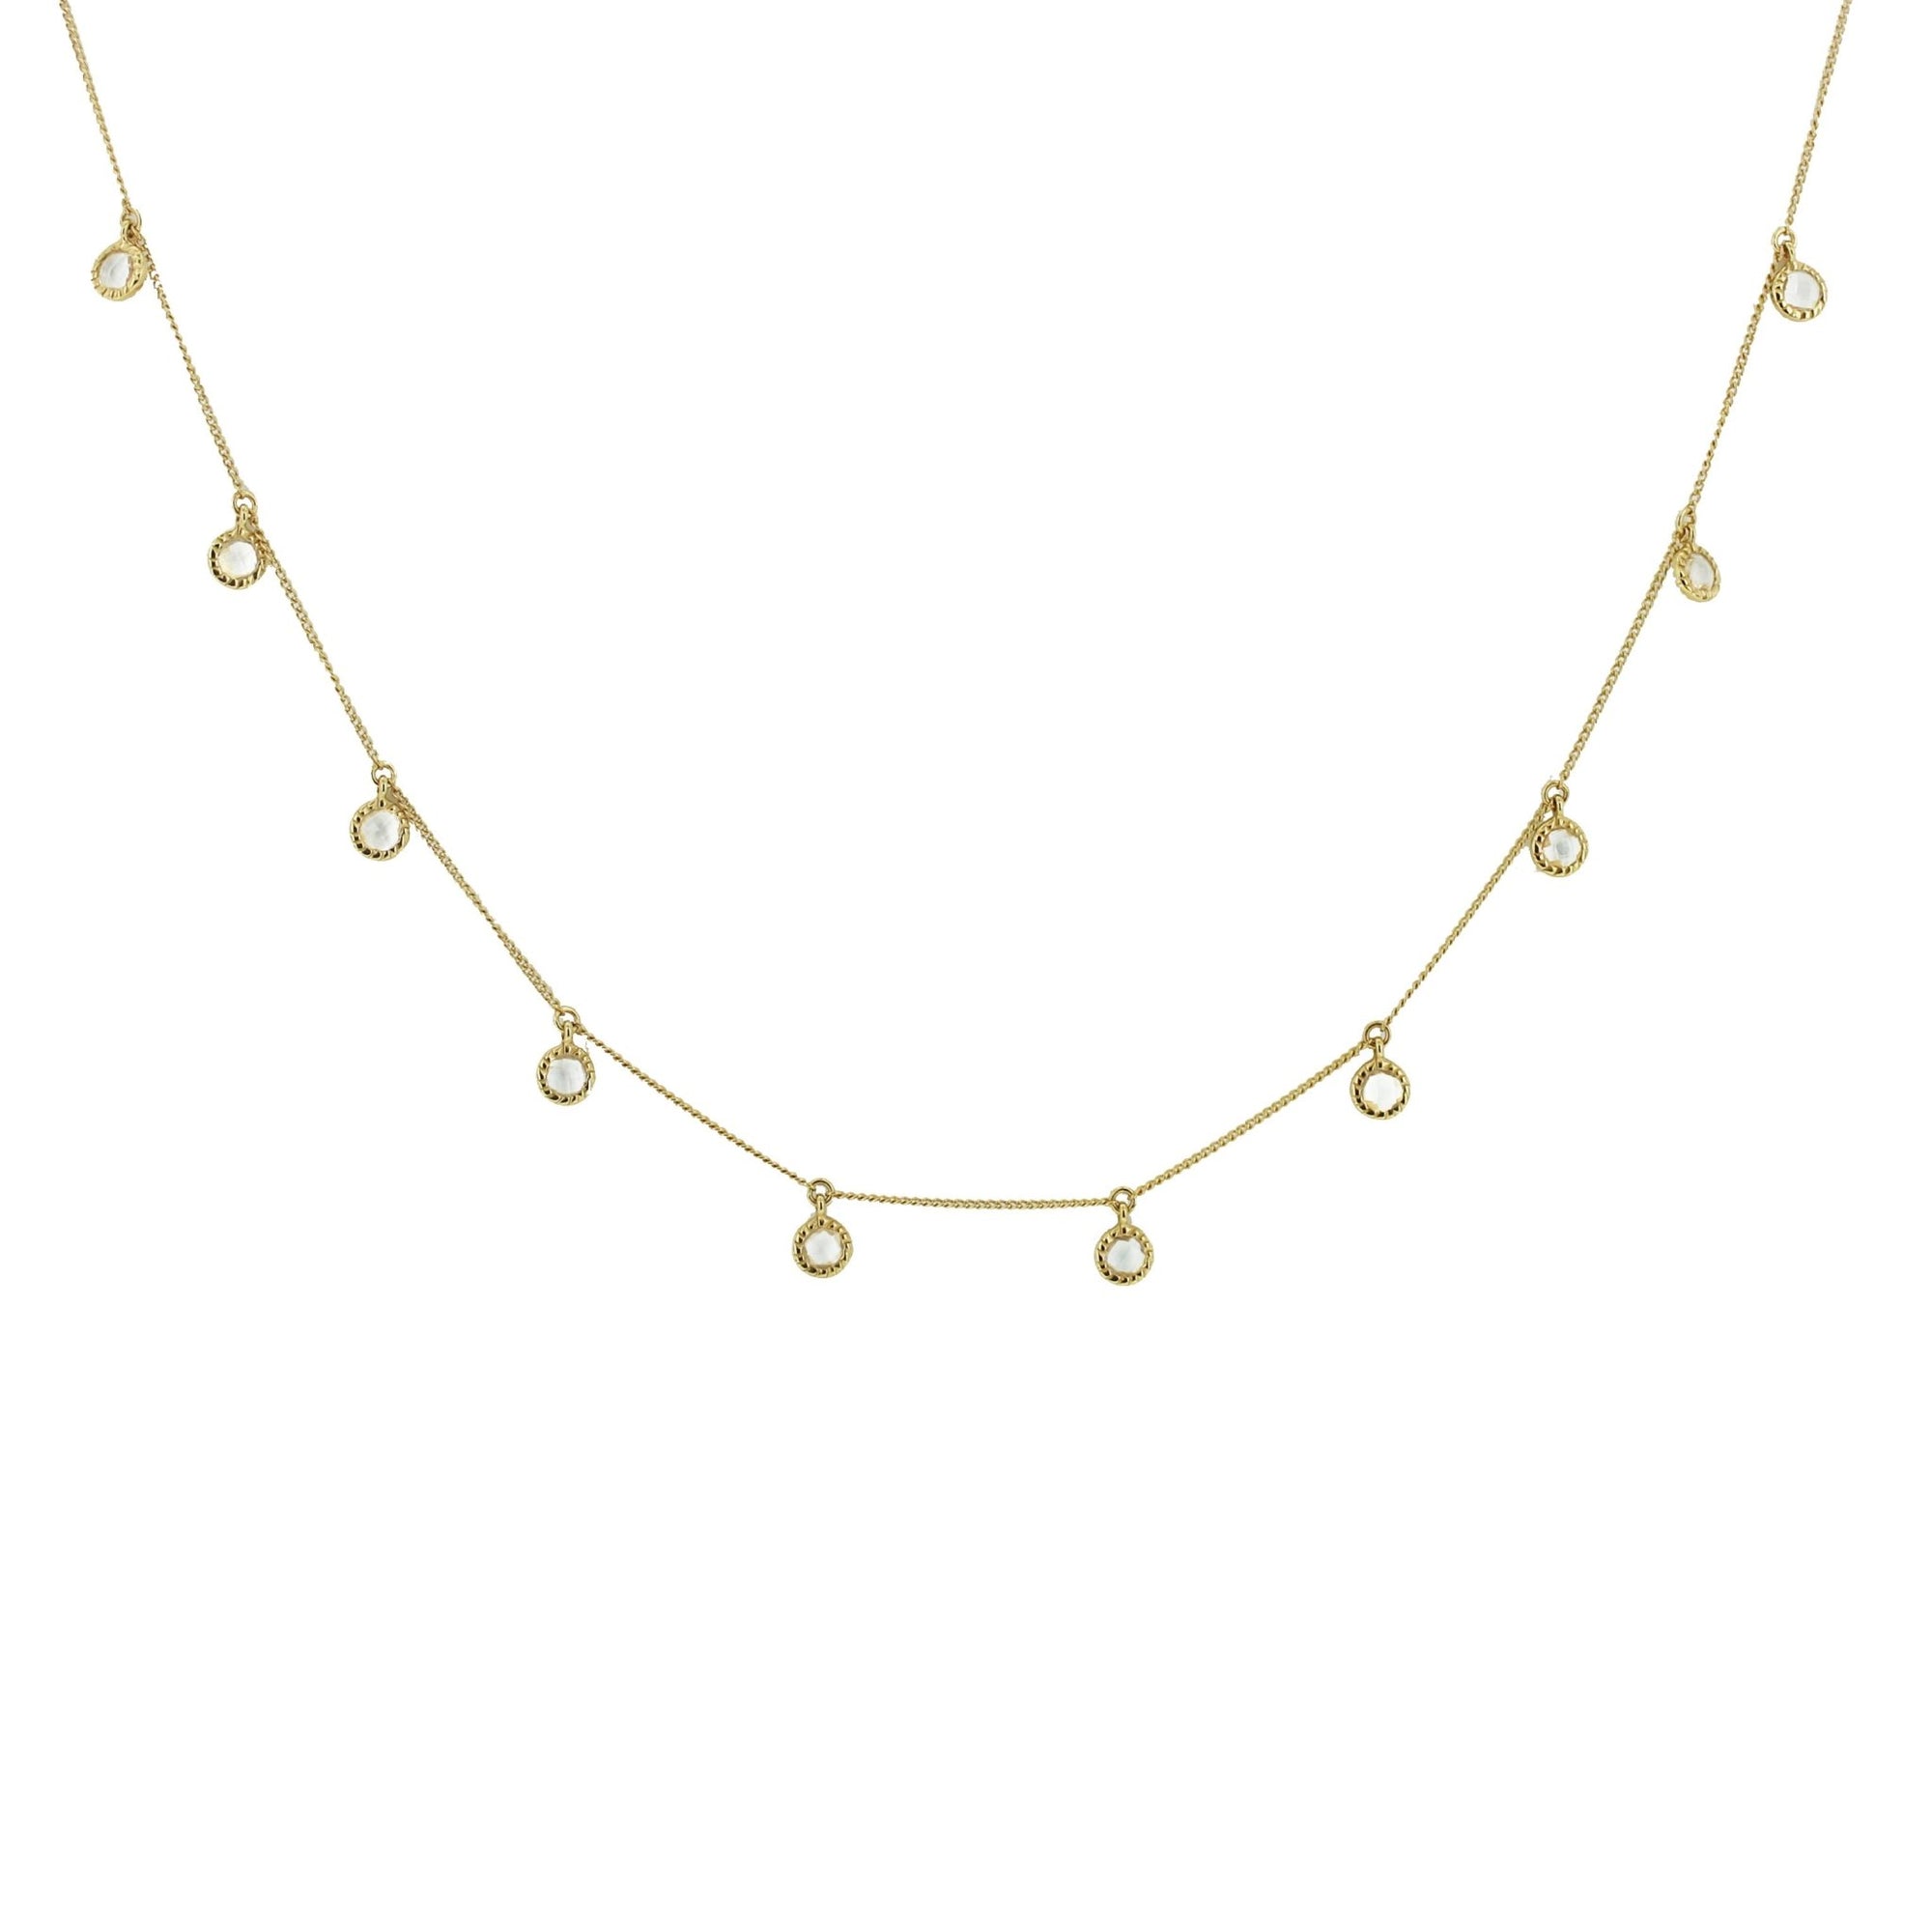 DAINTY LEGACY COLLAR NECKLACE - WHITE TOPAZ & GOLD - SO PRETTY CARA COTTER